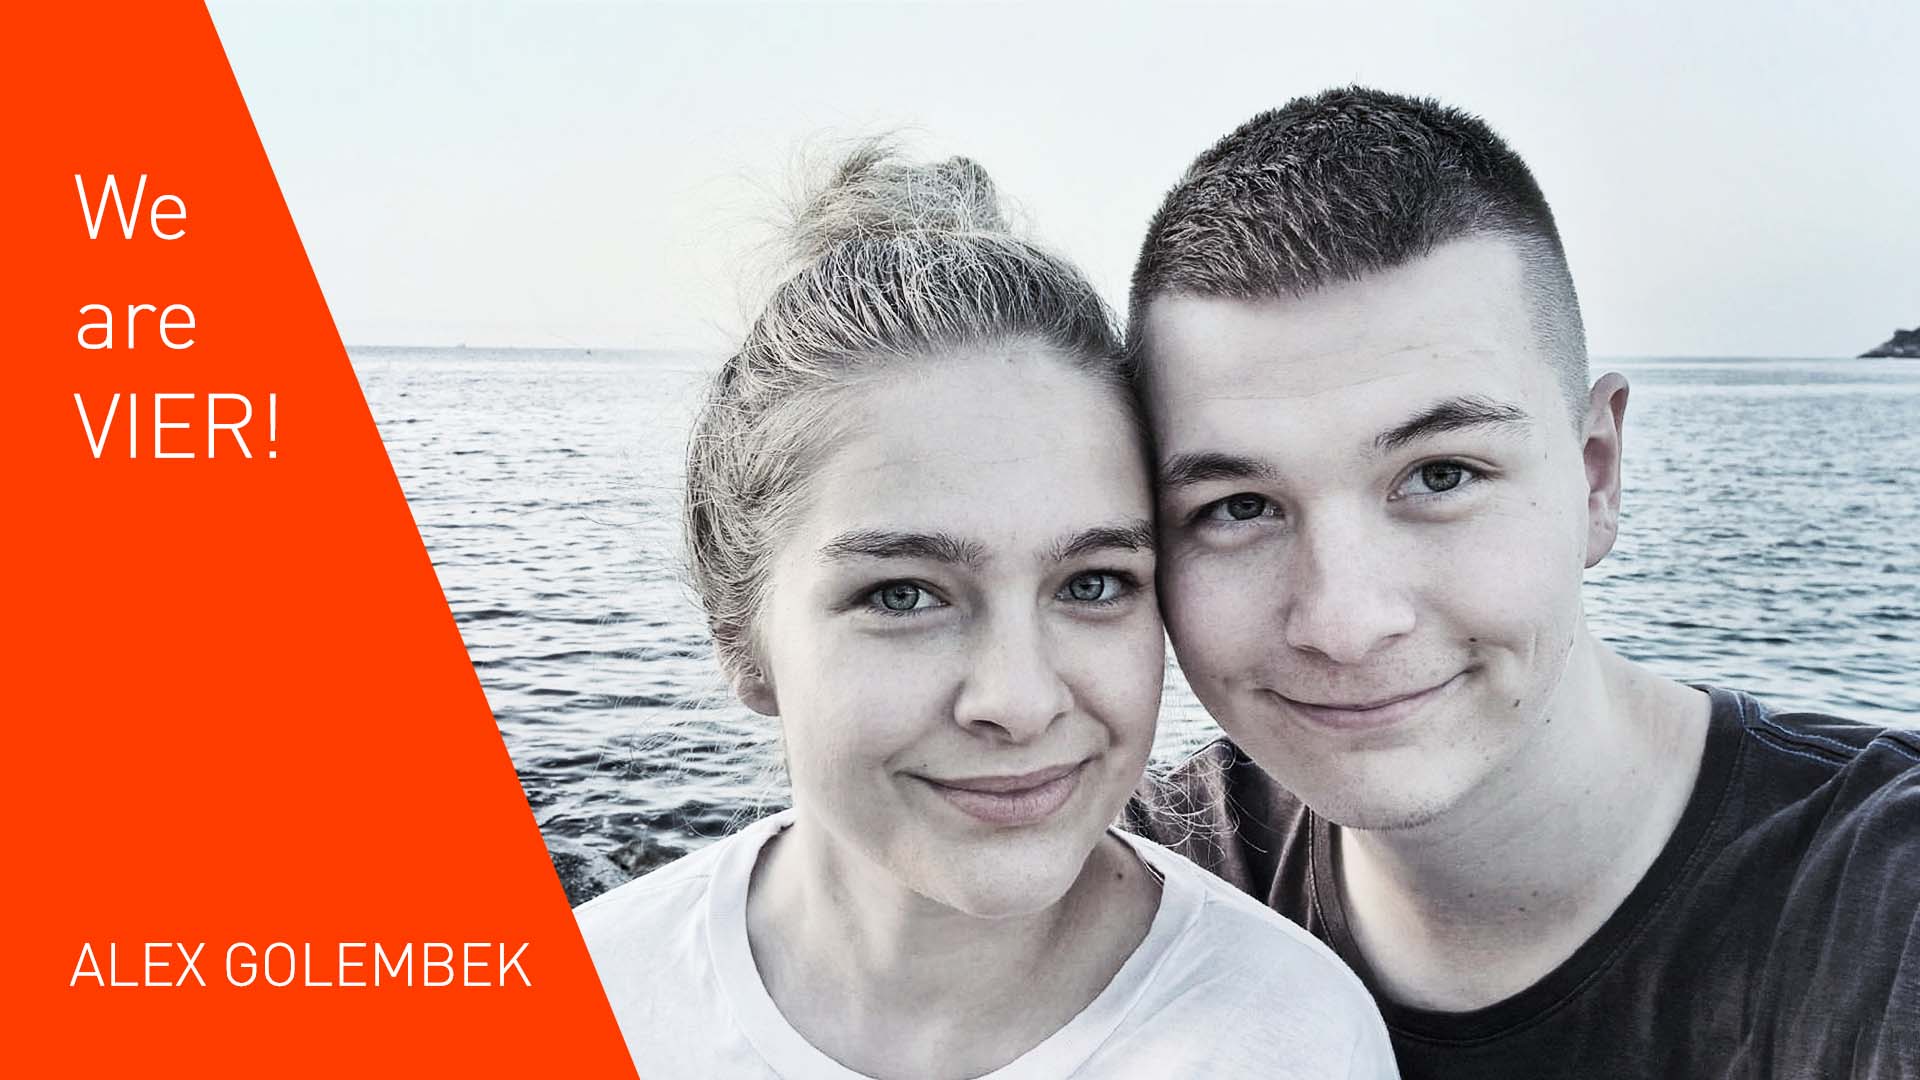 Alexander Golembek, VIER IT System Specialist, with his partner Lea.